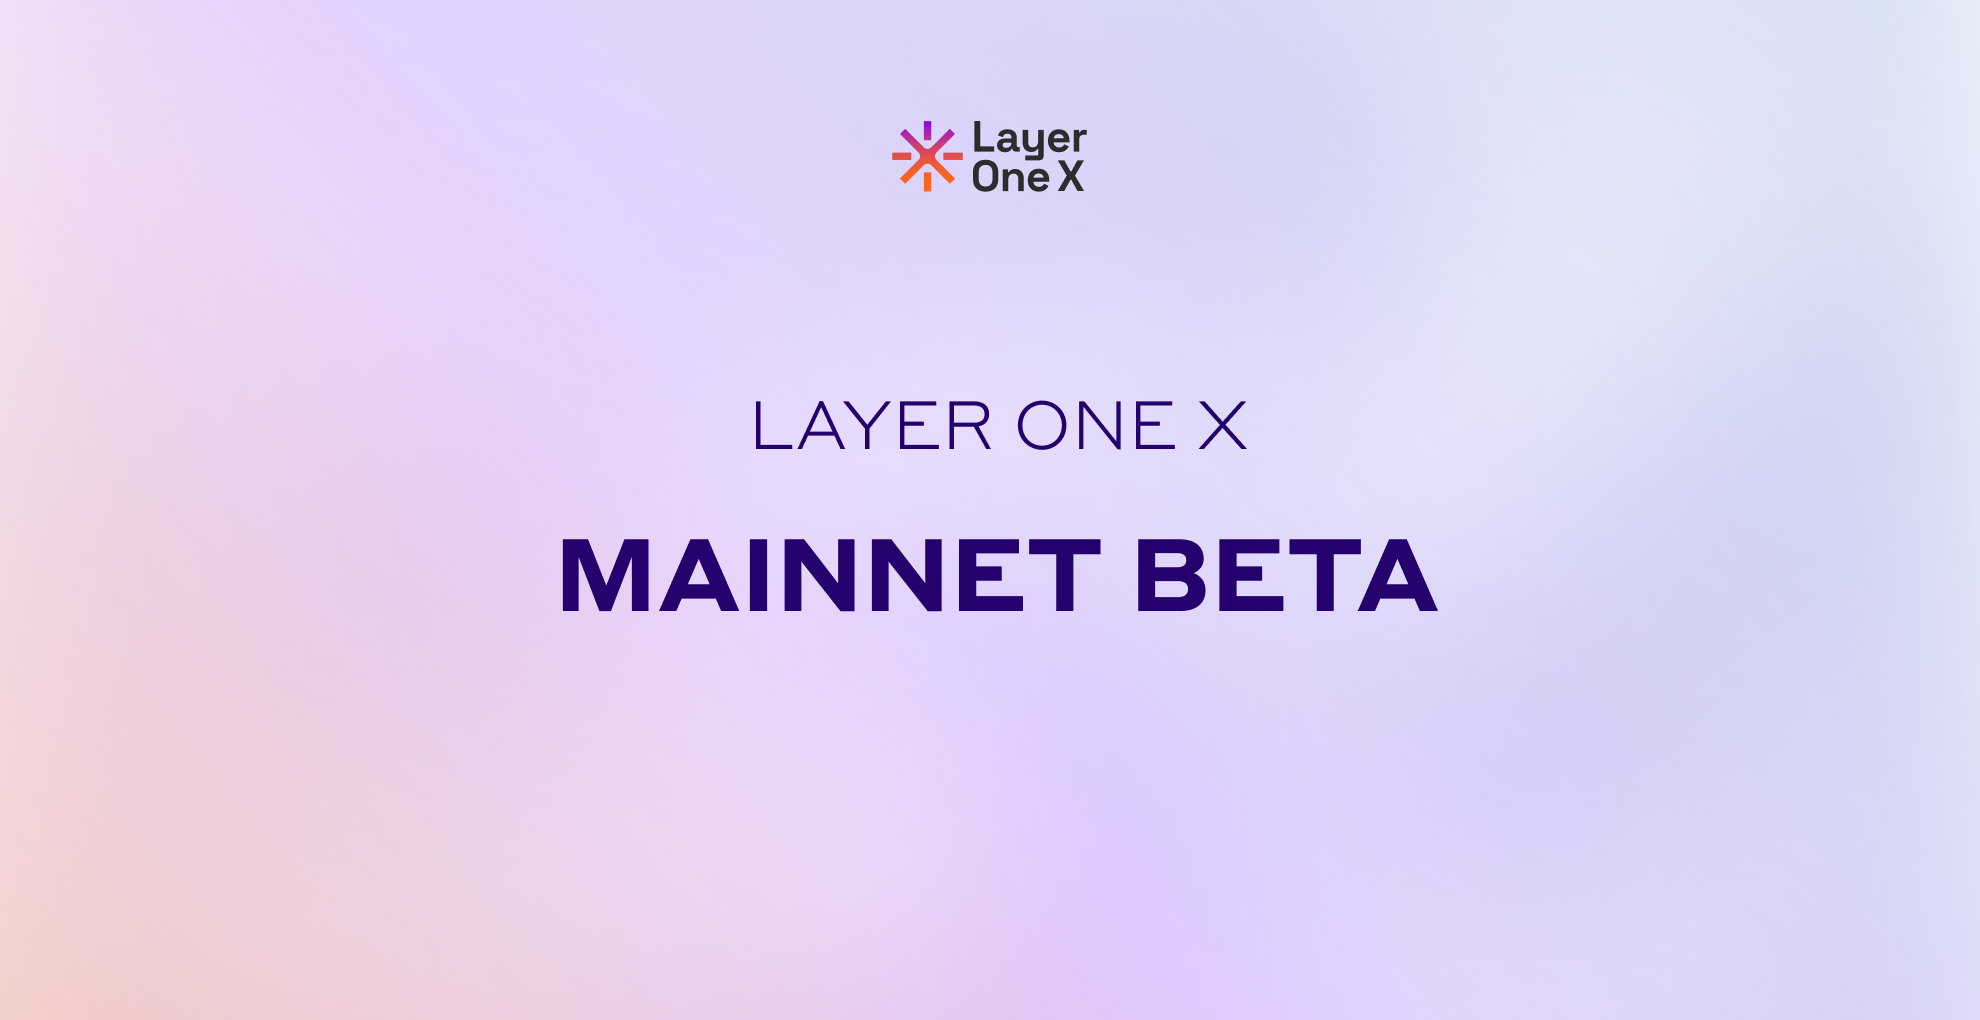 Securing the Layer One X ecosystem through MainNet Beta